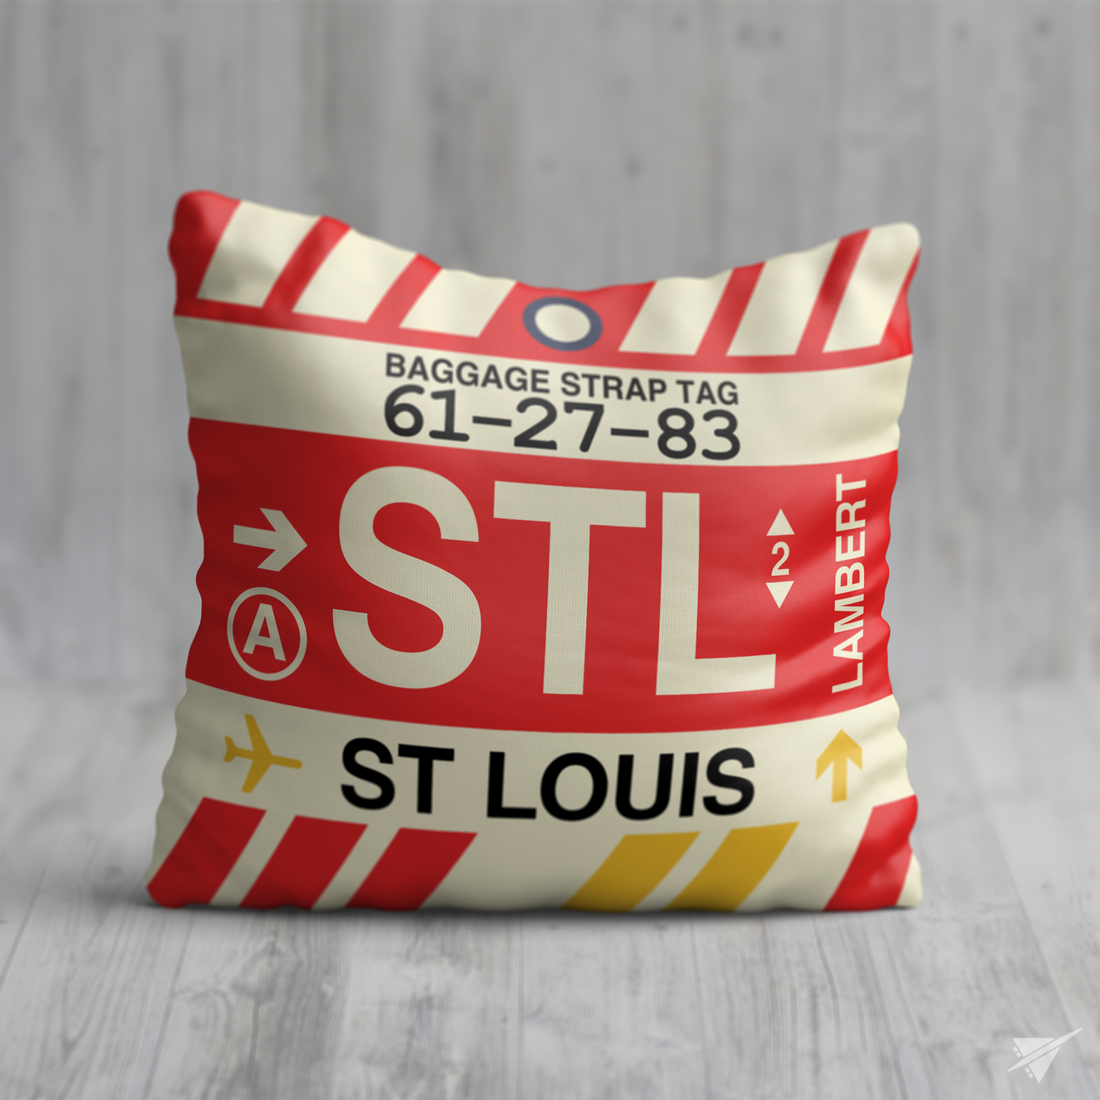 St. Louis Gift Ideas • Wall Art & Home Decor Featuring the STL Airport Code